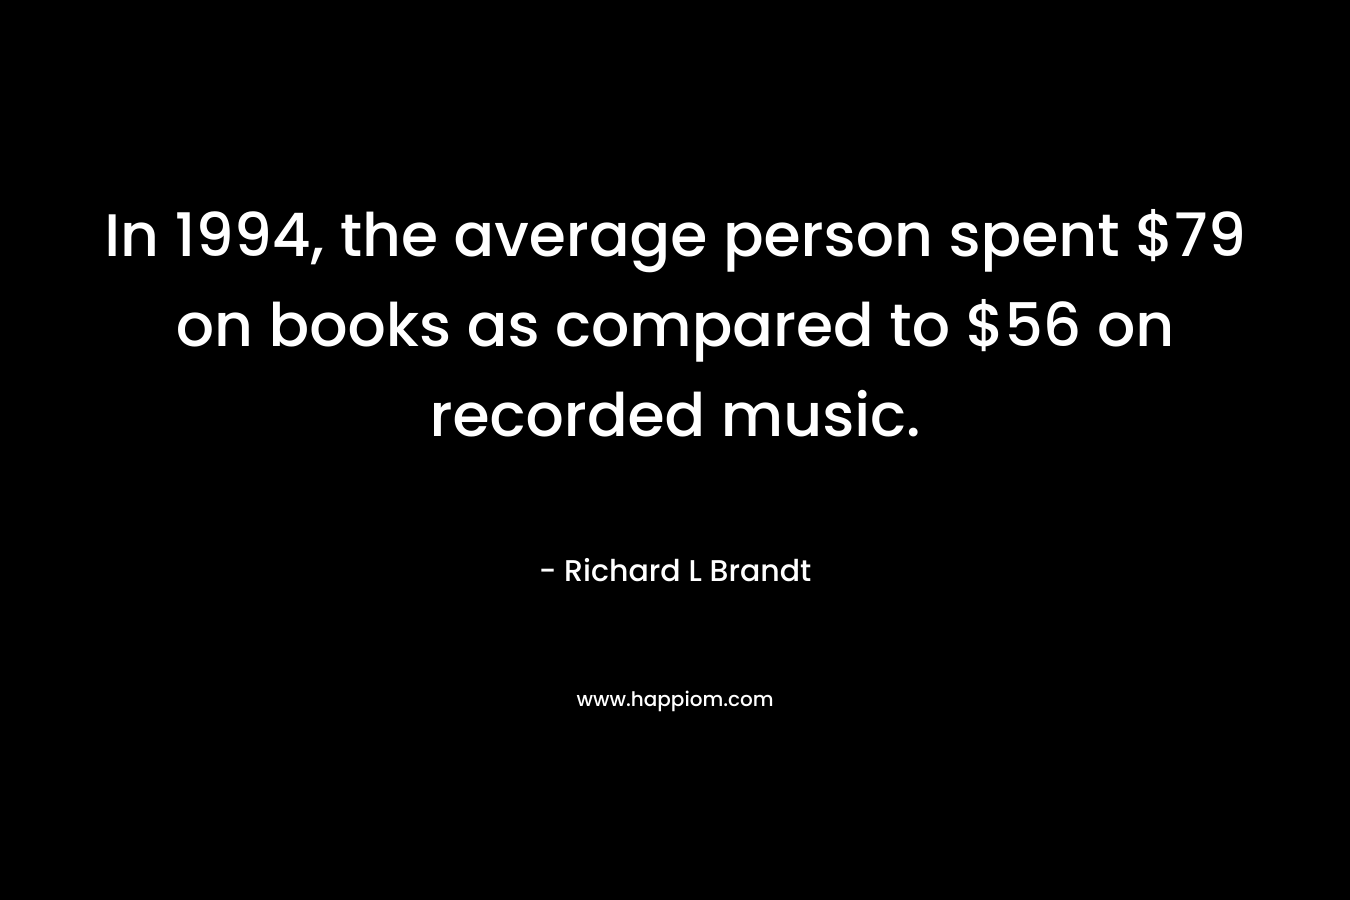 In 1994, the average person spent $79 on books as compared to $56 on recorded music.